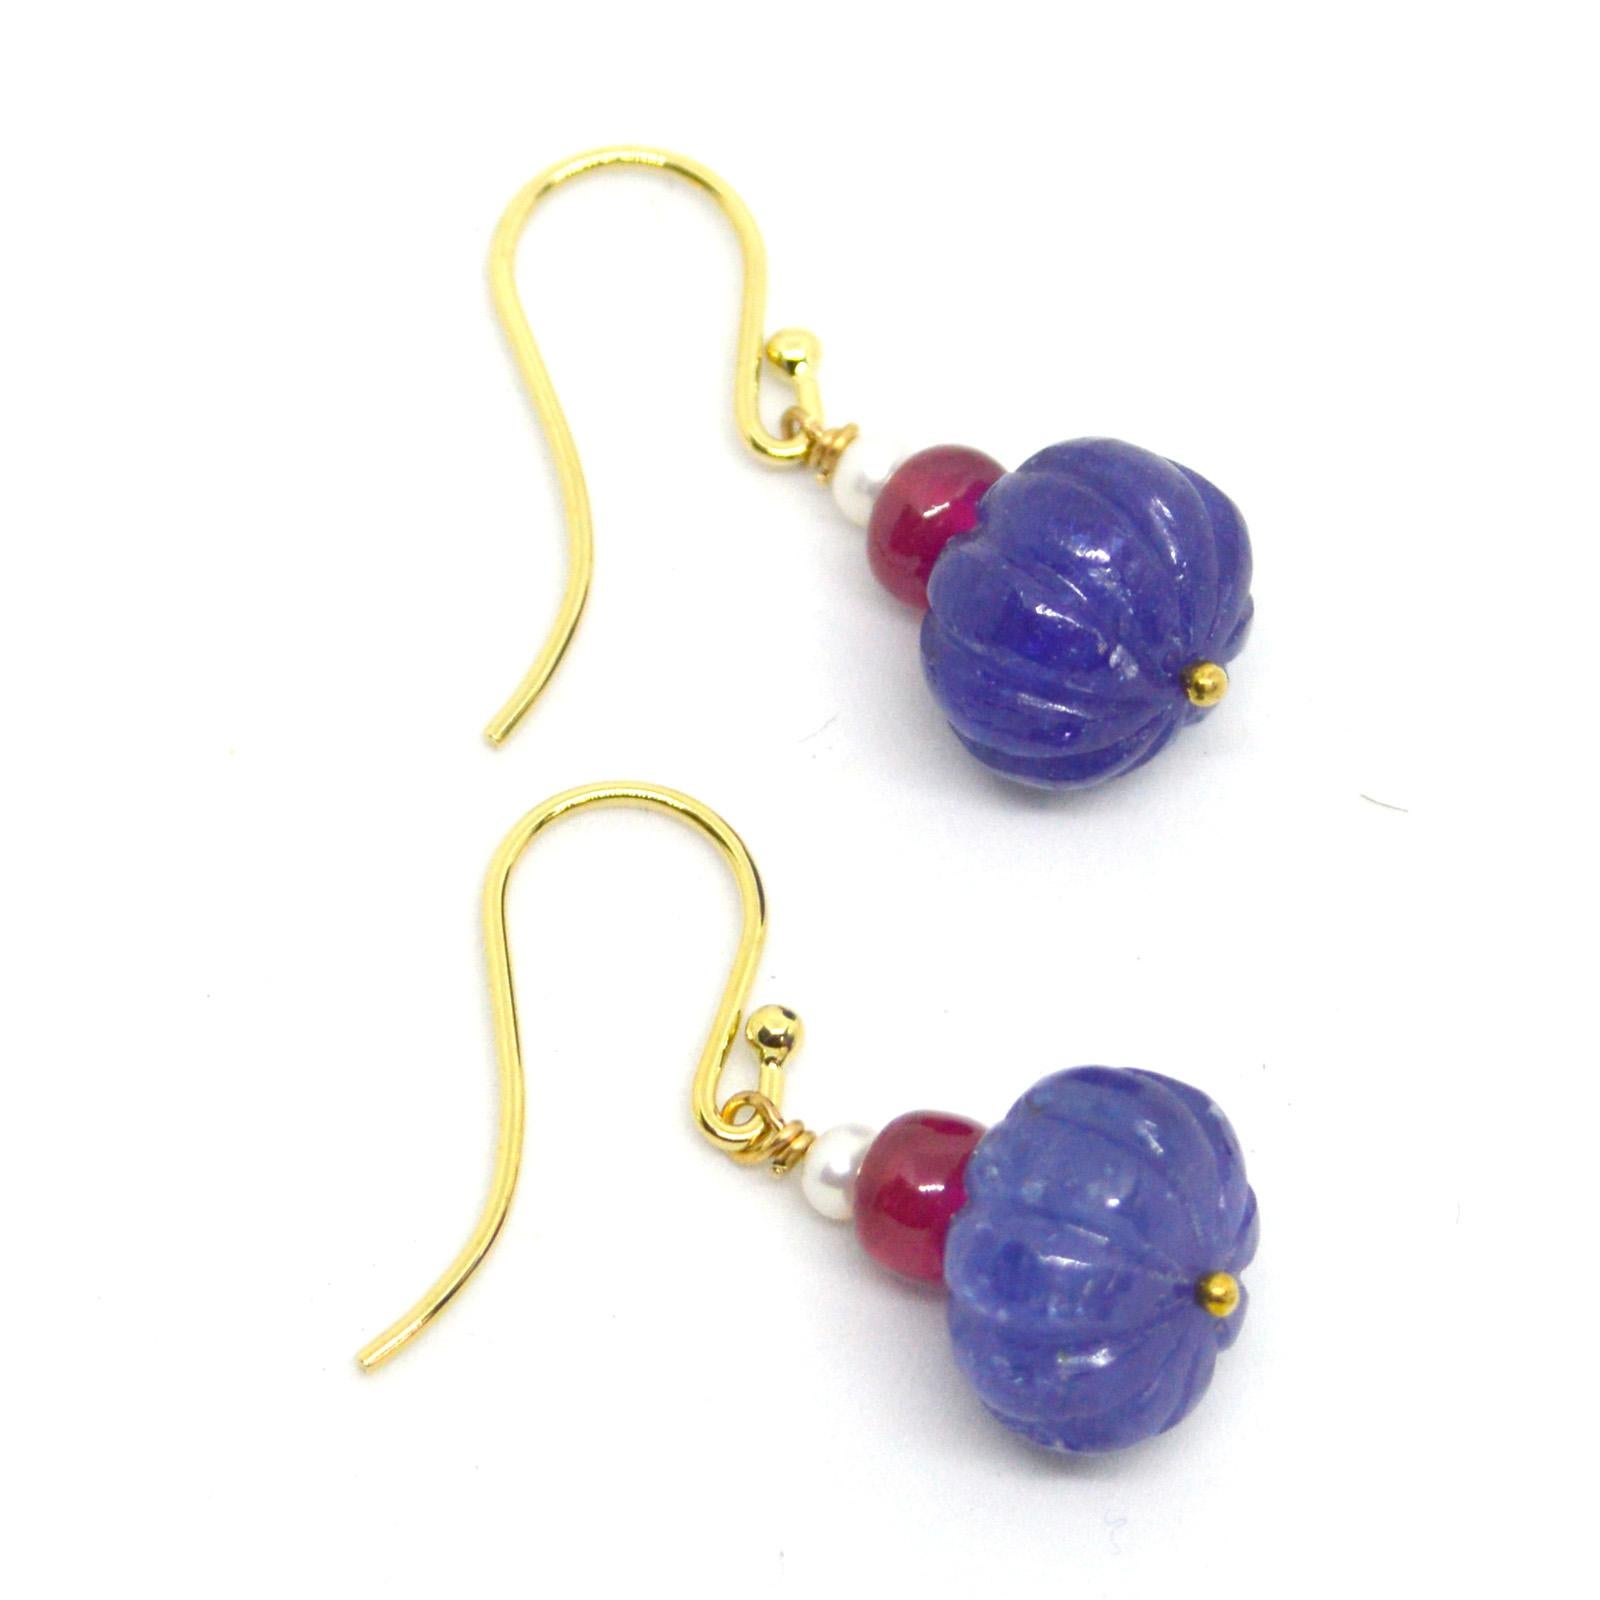 Carved Tanzanite melon shaped beads 8x12mm with 3mm Fresh Water Pearls and Polished rondels of Natural Burmese Rubies 5.6x4.8mm on 9kt Gold sheppard and headpin
Finished Earrings measures 30mm  7.22inches
